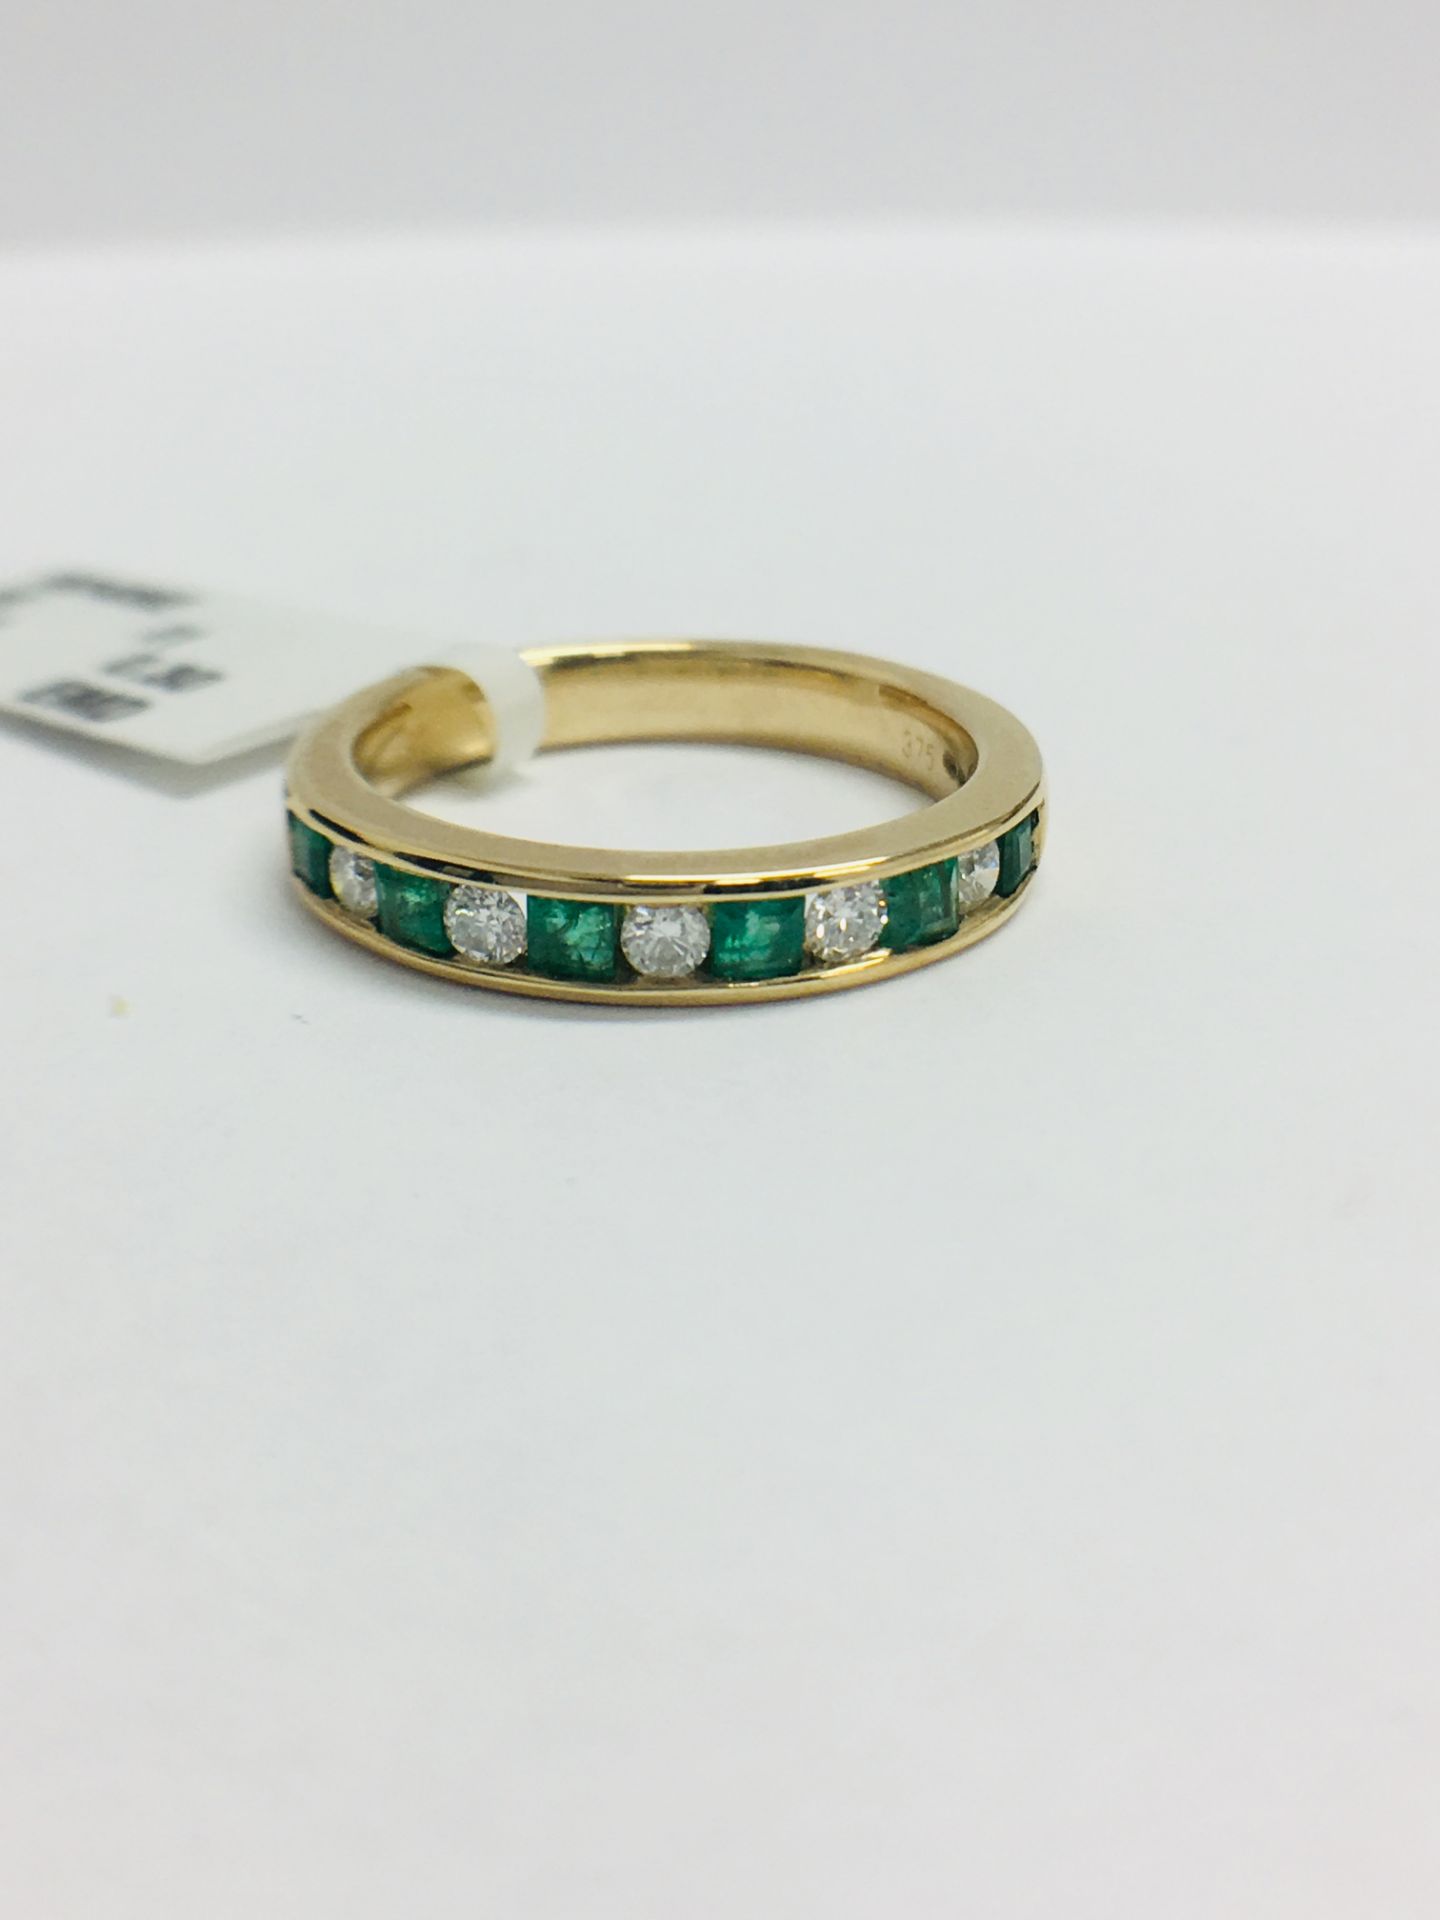 9ct Yellow Gold Emerald Diamond Channel Set Eternity Ring - Image 12 of 13